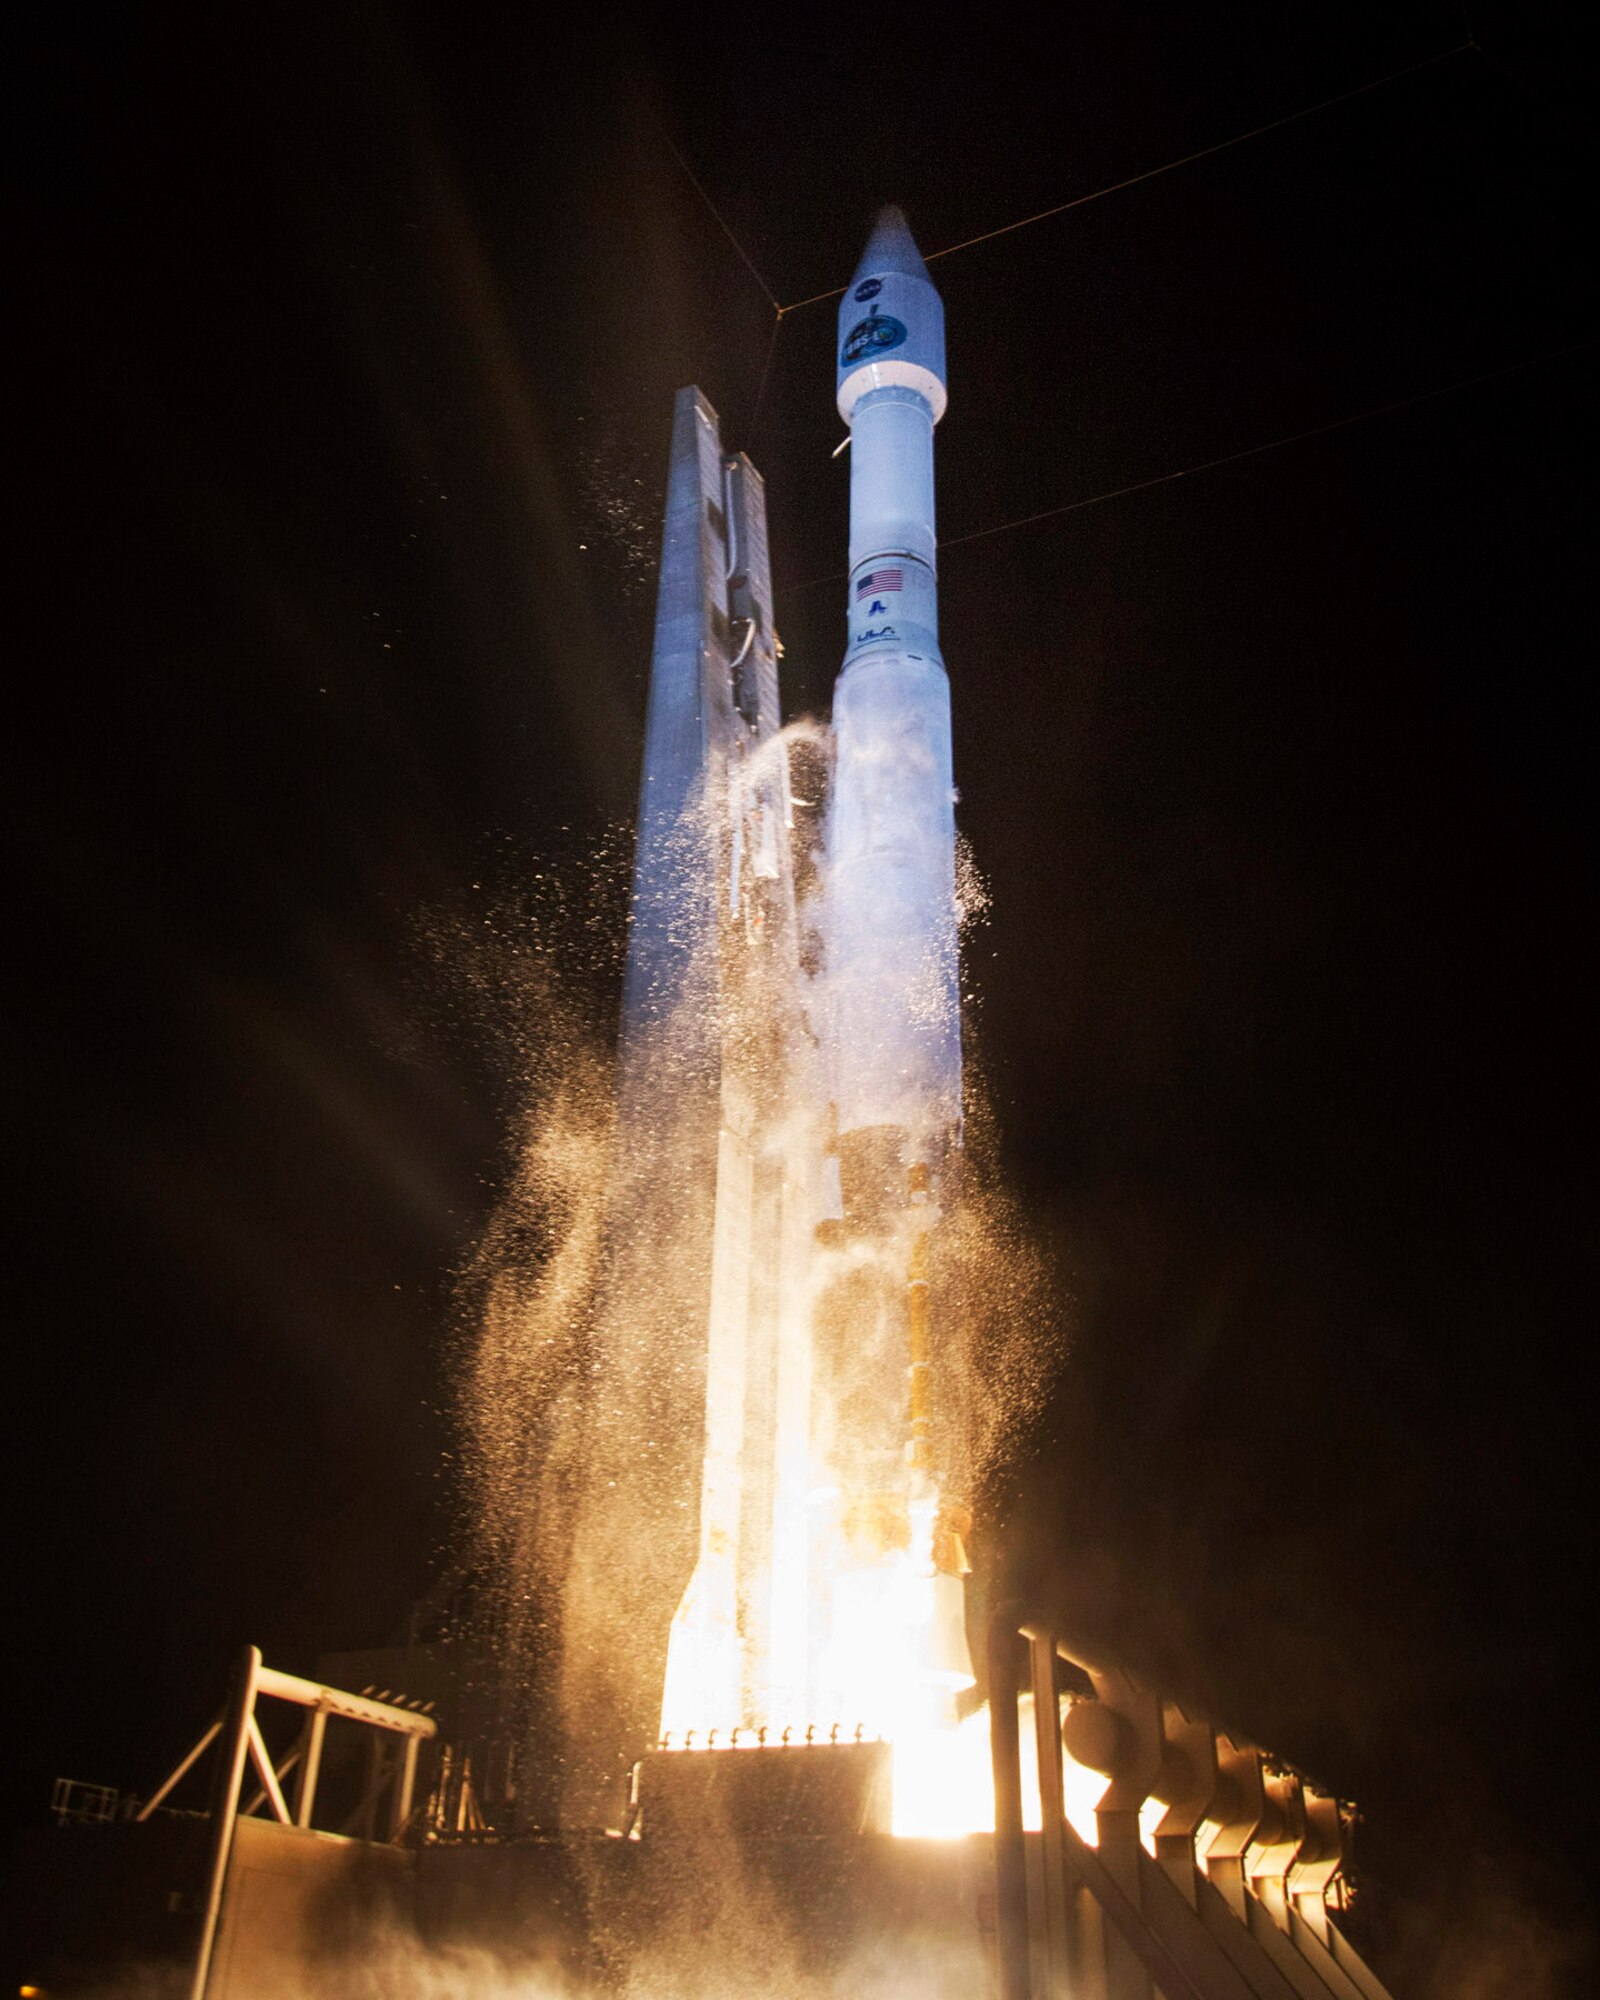 Cape Canaveral Air Force Station, Fla. (Jan. 23, 2014) – A United Launch Alliance (ULA) Atlas V rocket successfully launched NASA’s Tracking and Data Relay Satellite (TDRS-L) payload at 9:33 p.m. EST today from Space Launch Complex-41. This was the first of 15 ULA launches scheduled for 2014 and the 78th ULA launch for ULA in just over seven years. NASA established the TDRS project in 1973, with the first launch in 1983, to provide around-the-clock and around-the-Earth communications for the network that routes voice calls, telemetry streams and television signals from the International Space Station, as well as telemetry and science data from the Hubble Space Telescope and other orbiting spacecraft. (Photo by Ben Cooper, United Launch Alliance)
